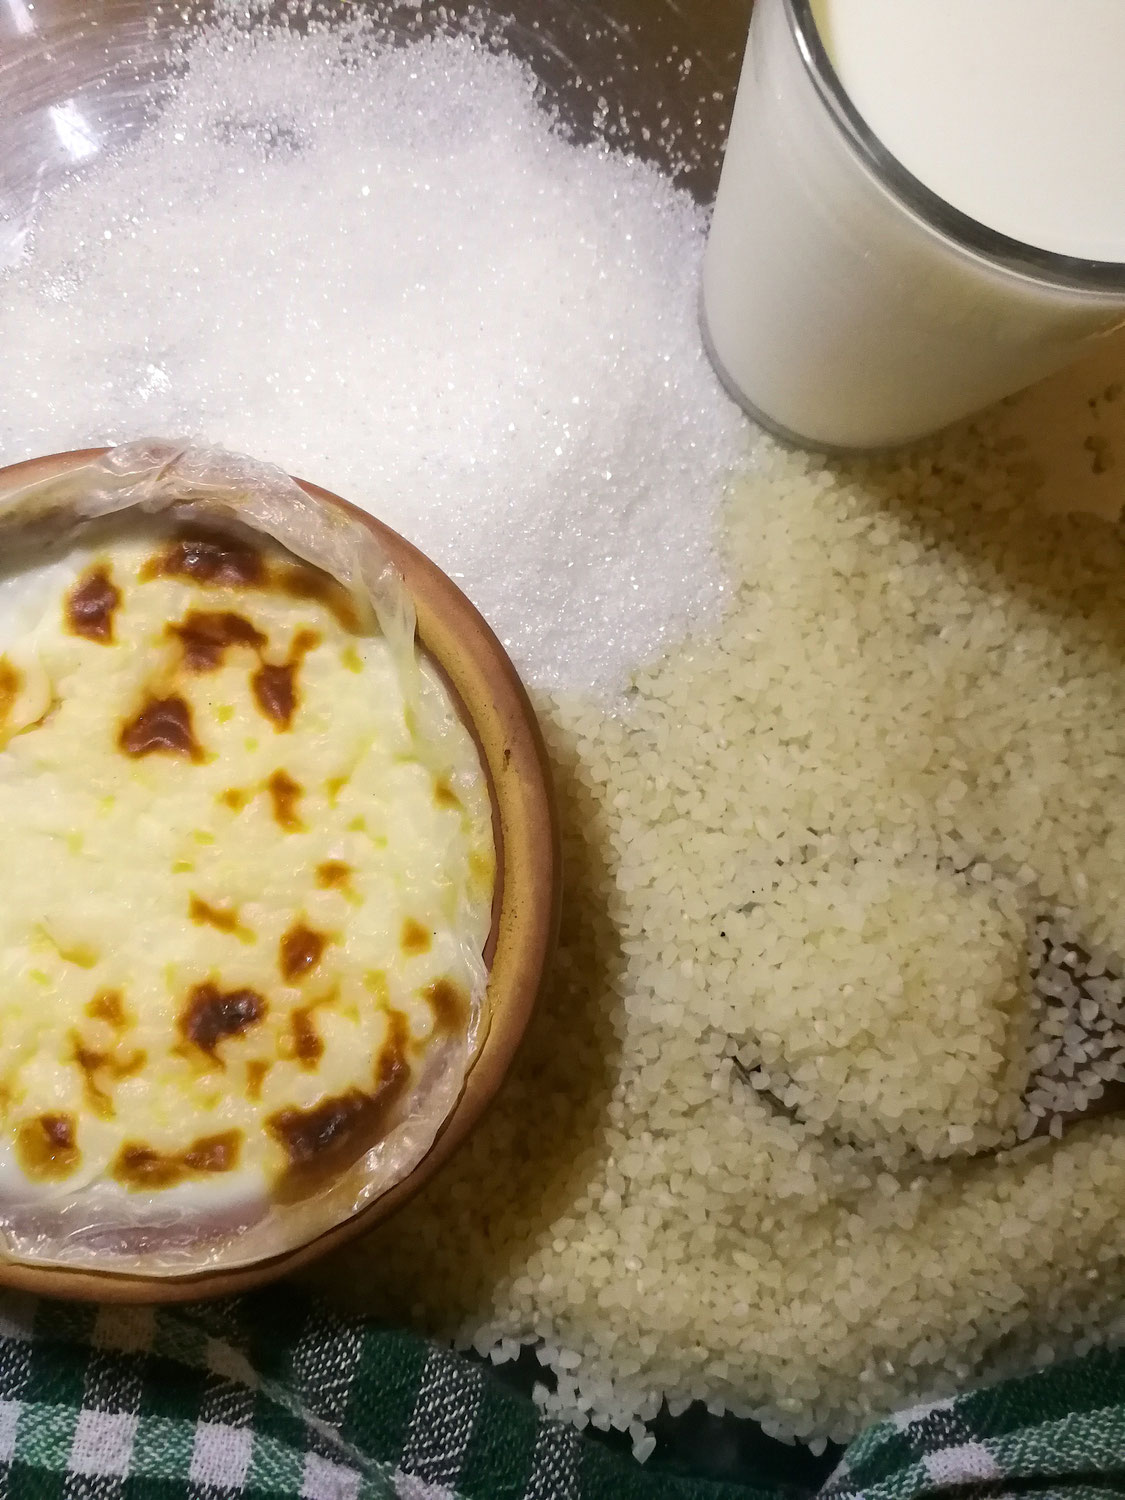 Turkish rice pudding (Sütlac): one recipe, two variations